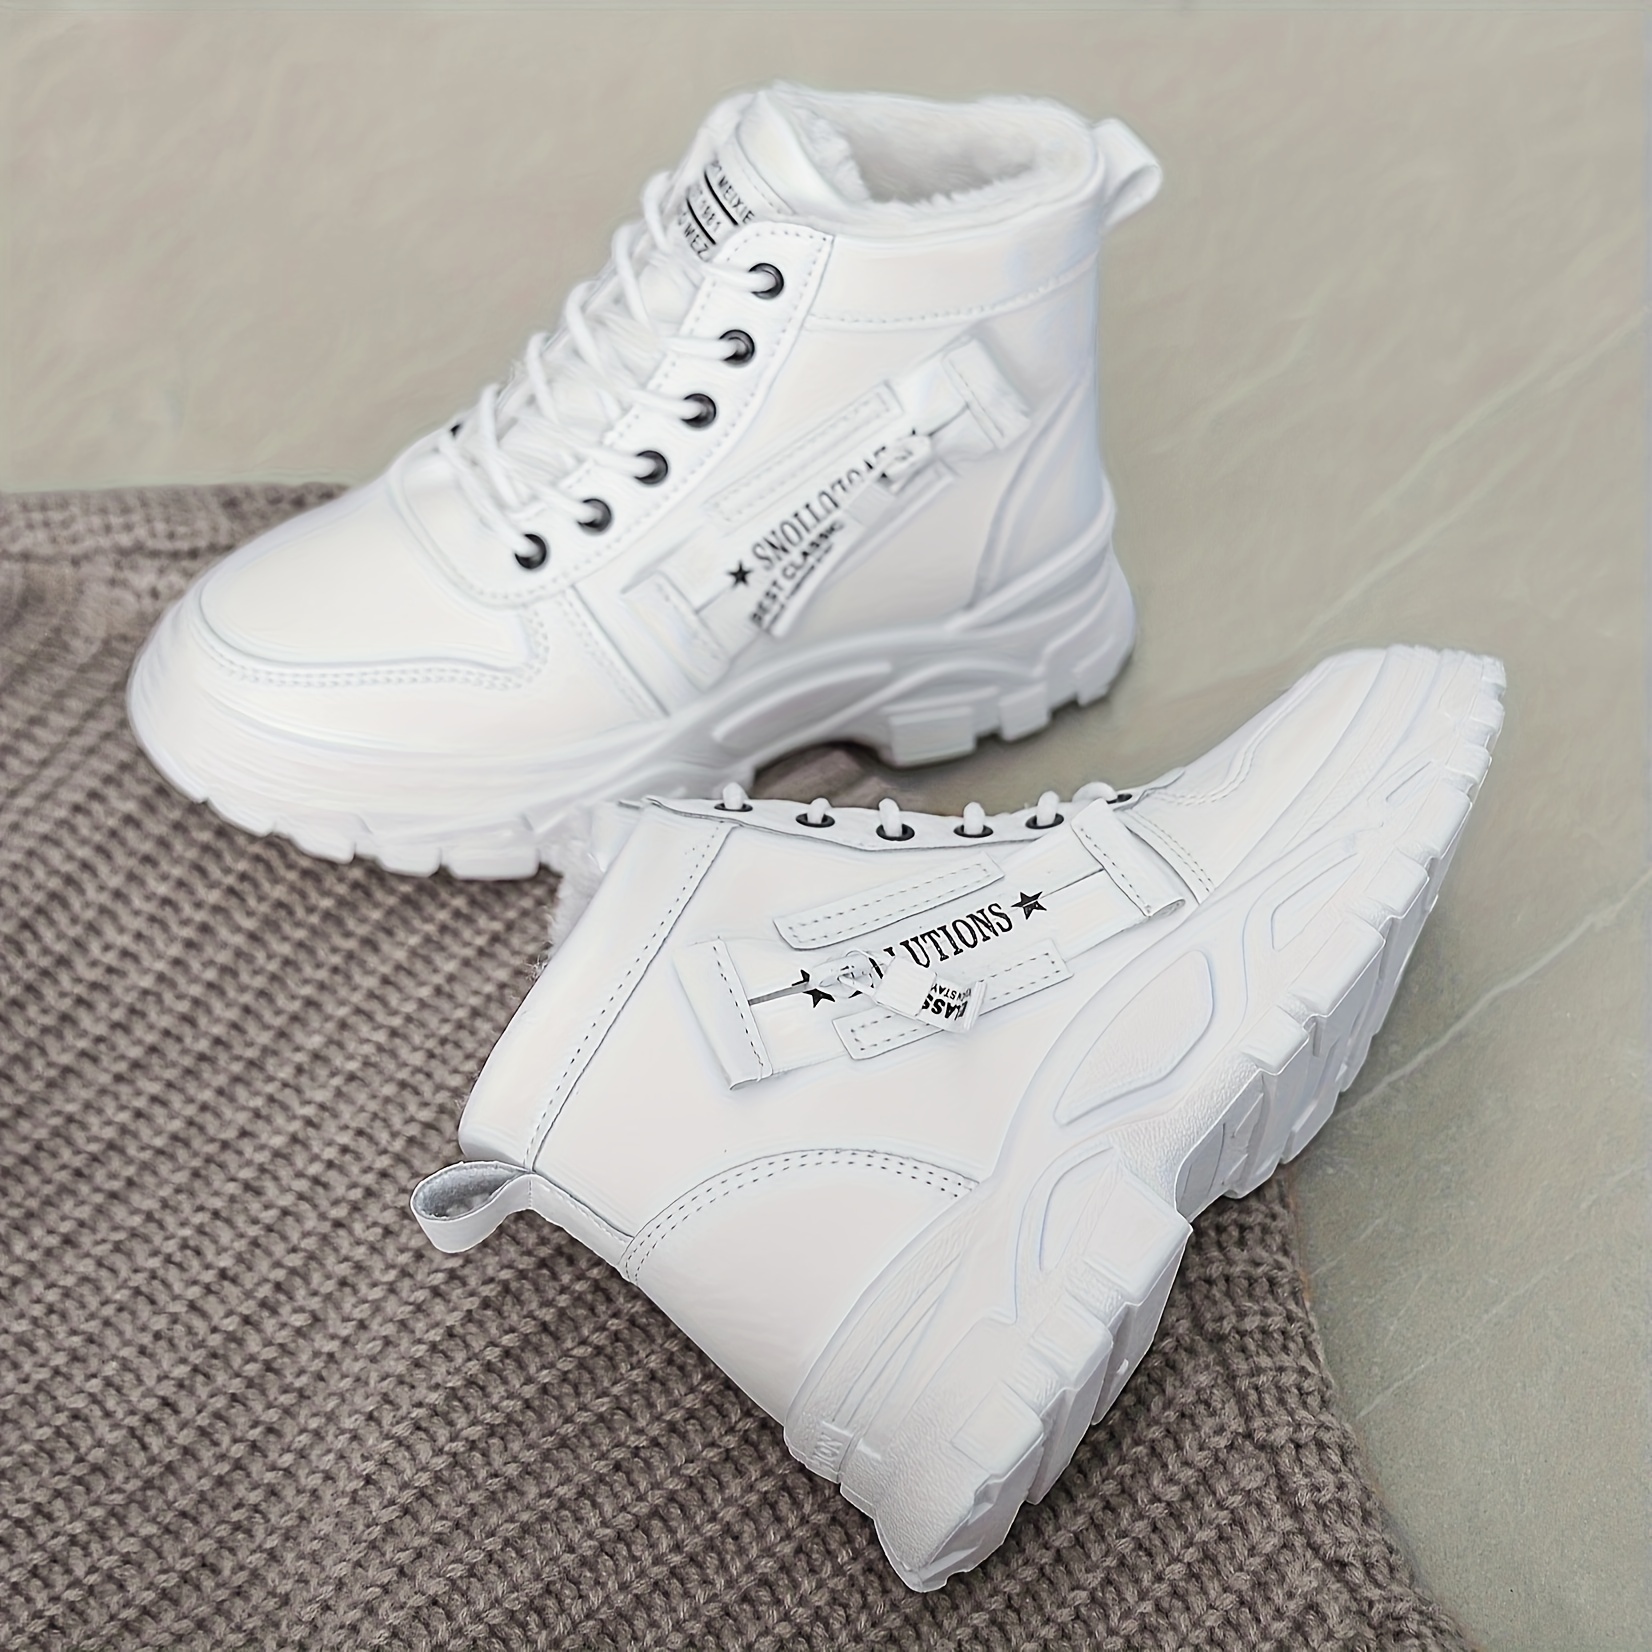 womens plush lined sneakers winter warm lace up high top ankle boots thermal outdoor shoes details 2